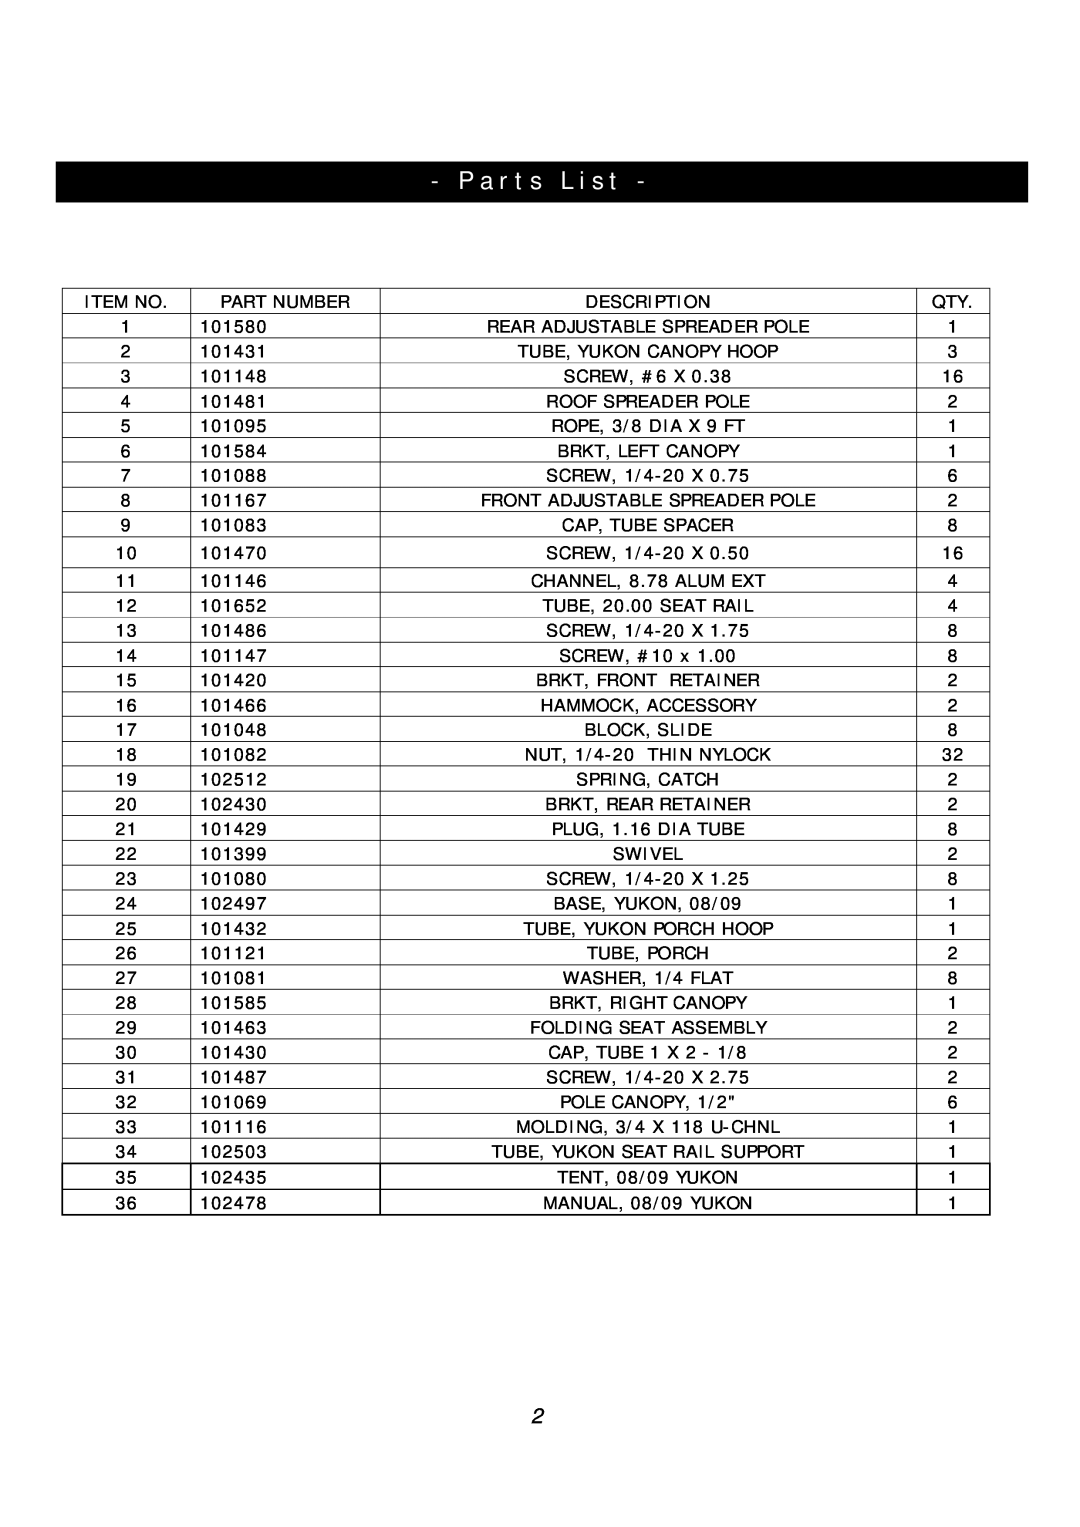 Clam Corp 8062 manual Parts List 